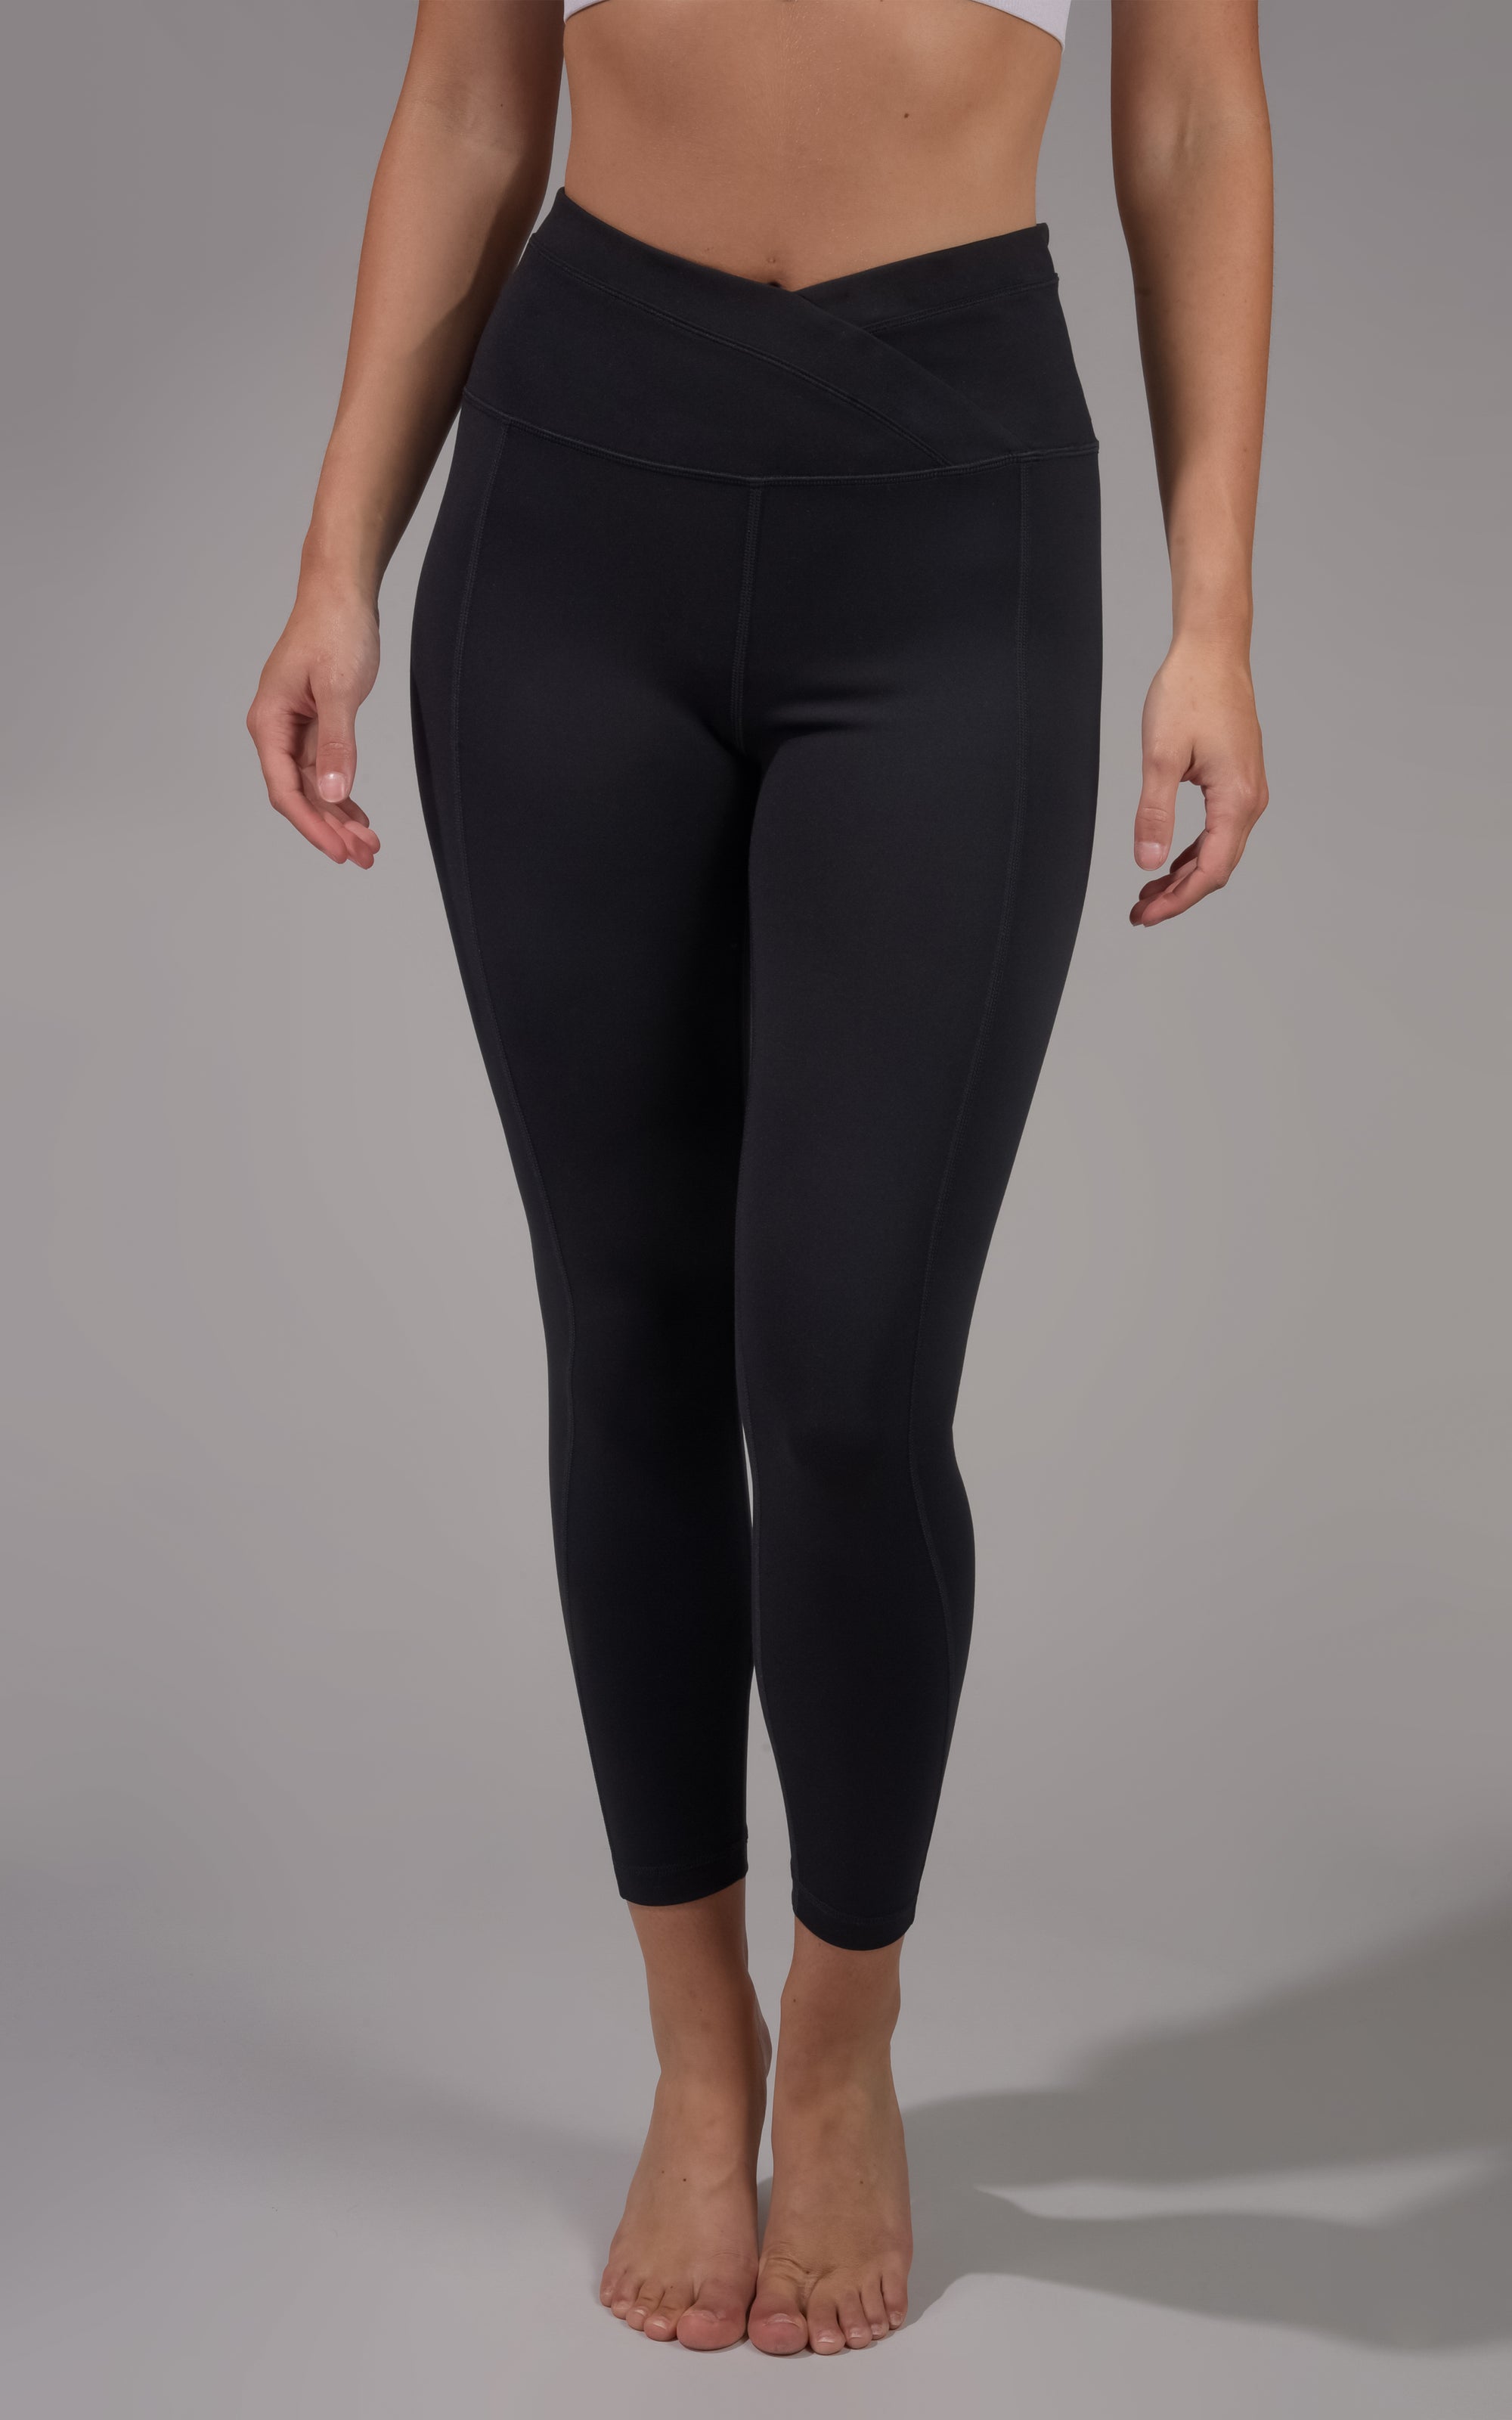 Bare Womens Low Impact Cross-Front High-Waist Leggings Style